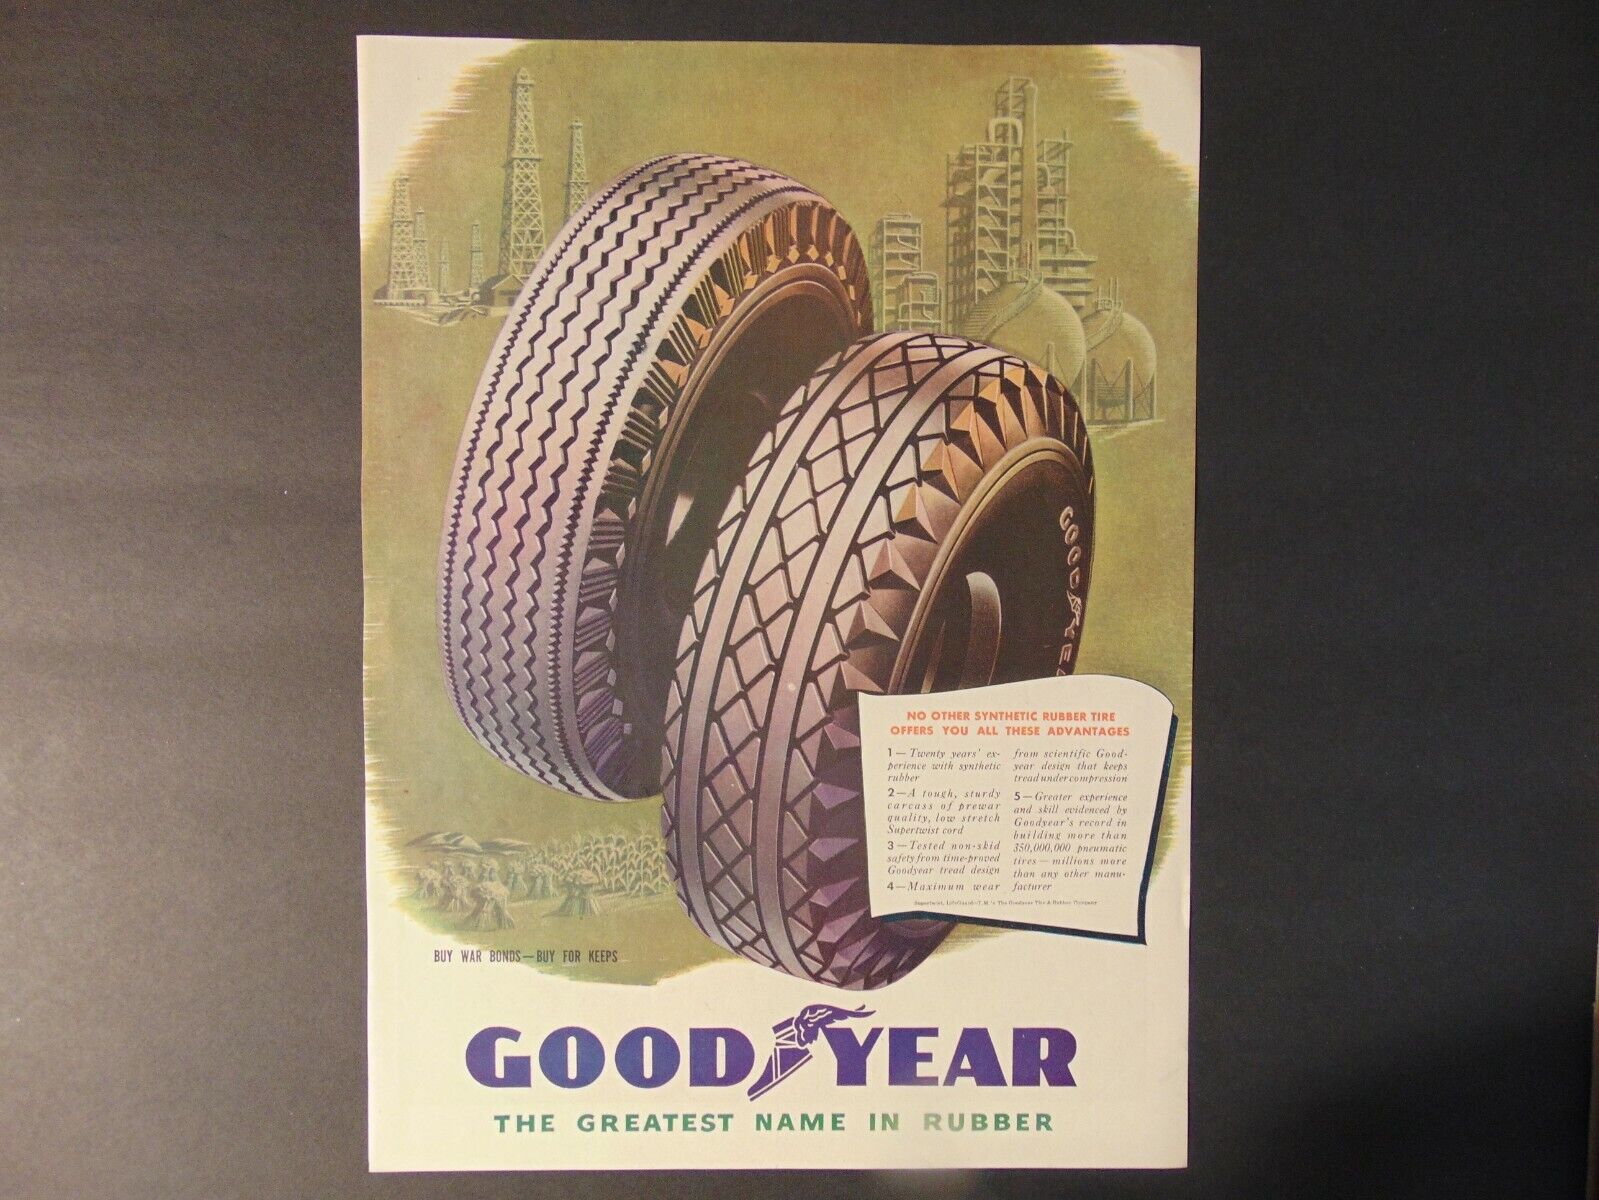 1945 GOOD YEAR TIRES The Greatest Name In Rubber vintage art print ad